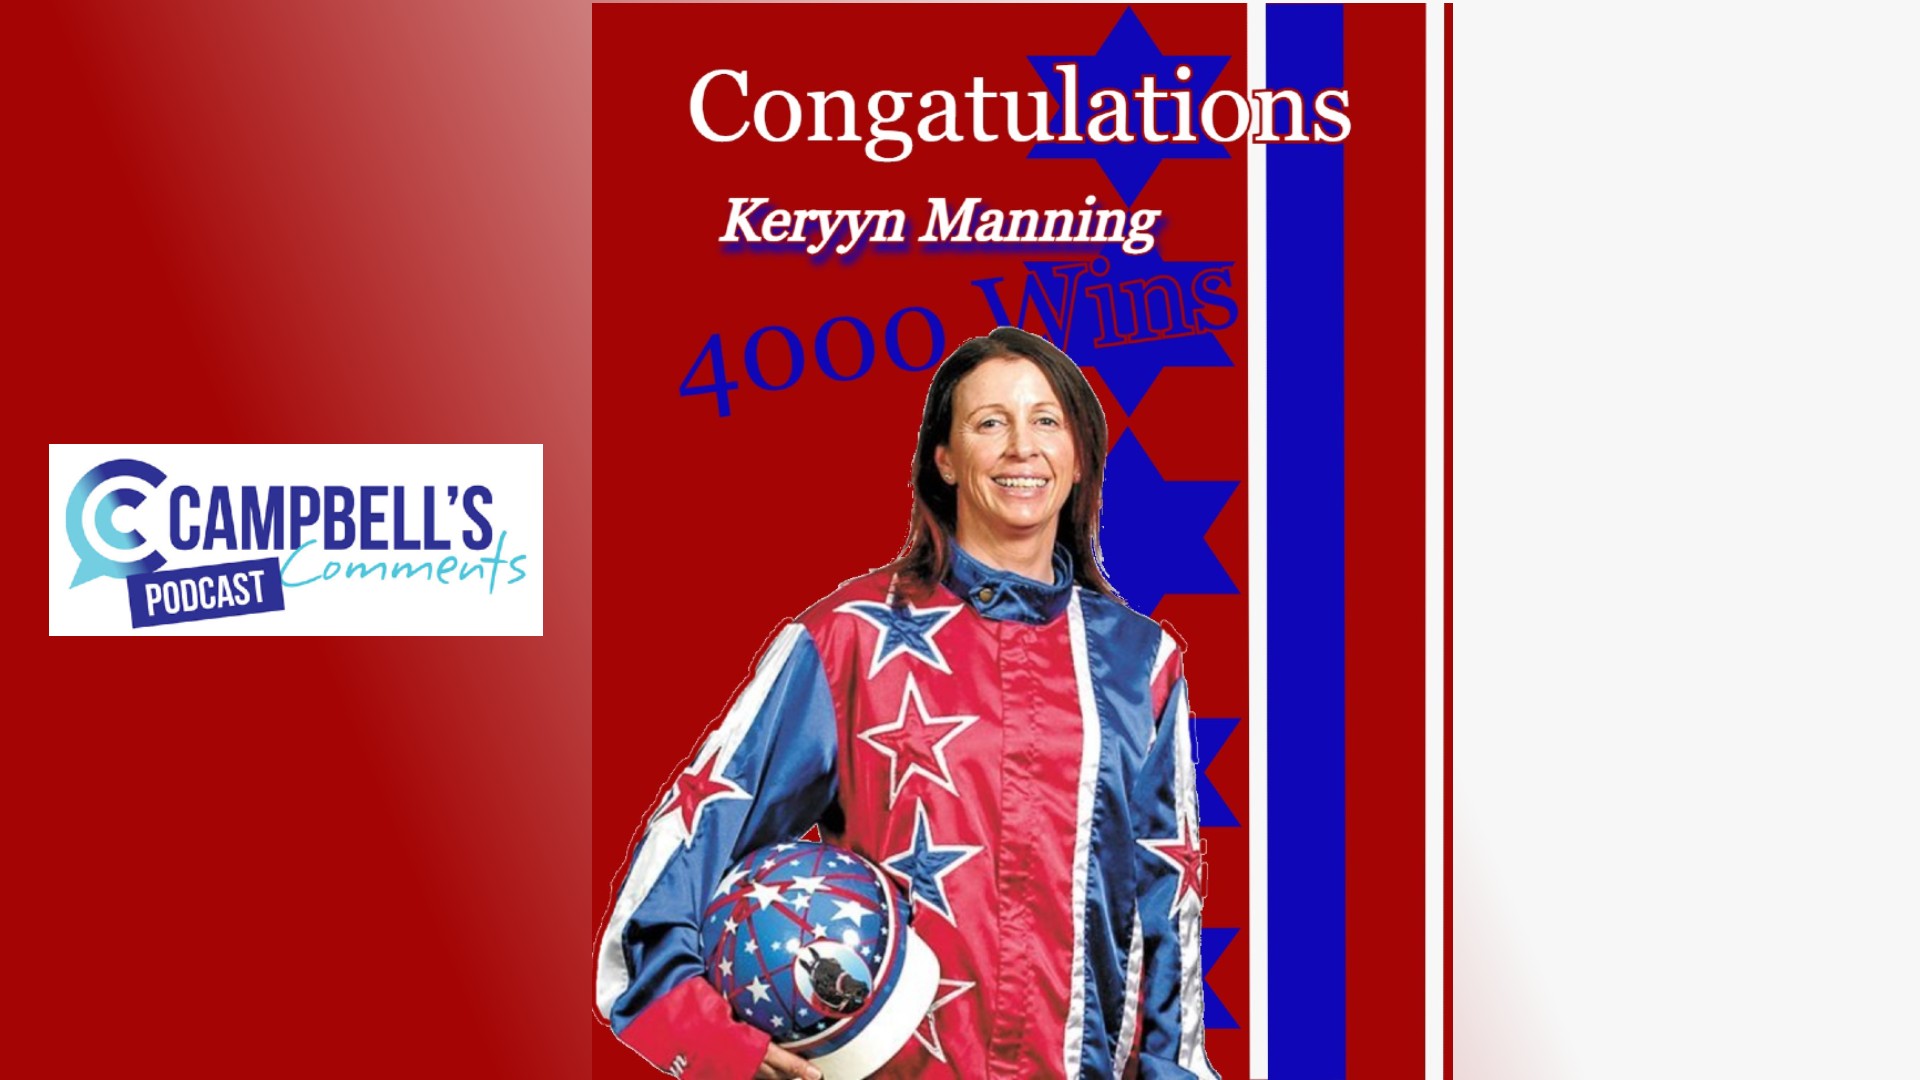 You are currently viewing 84: Keryyn Manning 4000 winners